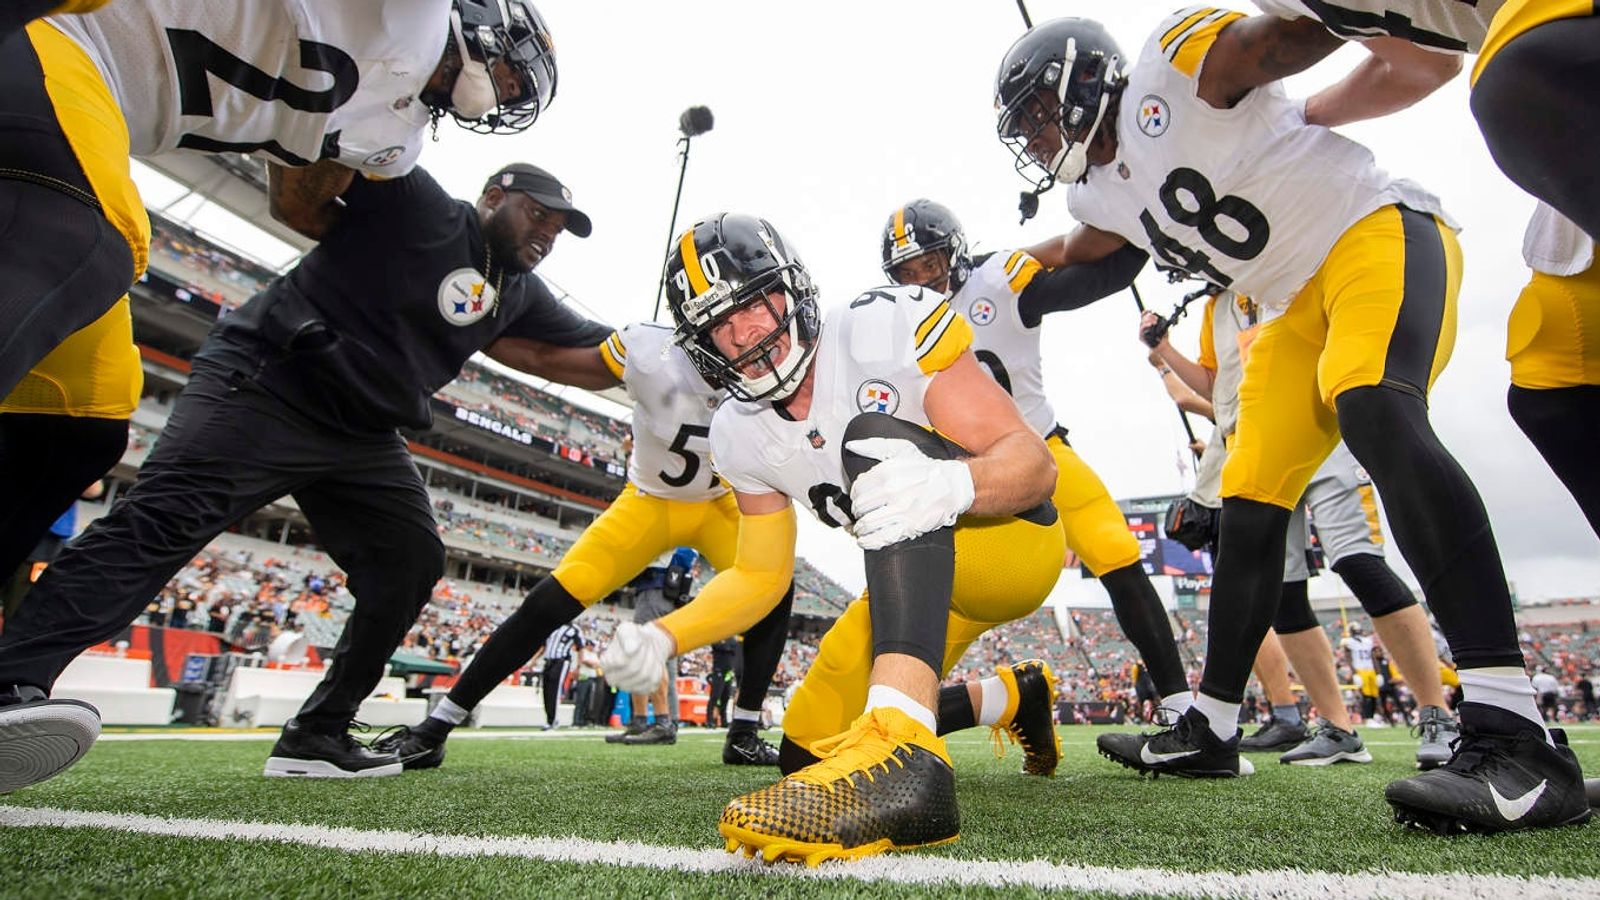 KDKA-TV, CBS Pittsburgh - FINAL SCORE: The Steelers fall to the Raiders in  their home opener, scoring just 17 points to the Raiders' 26.